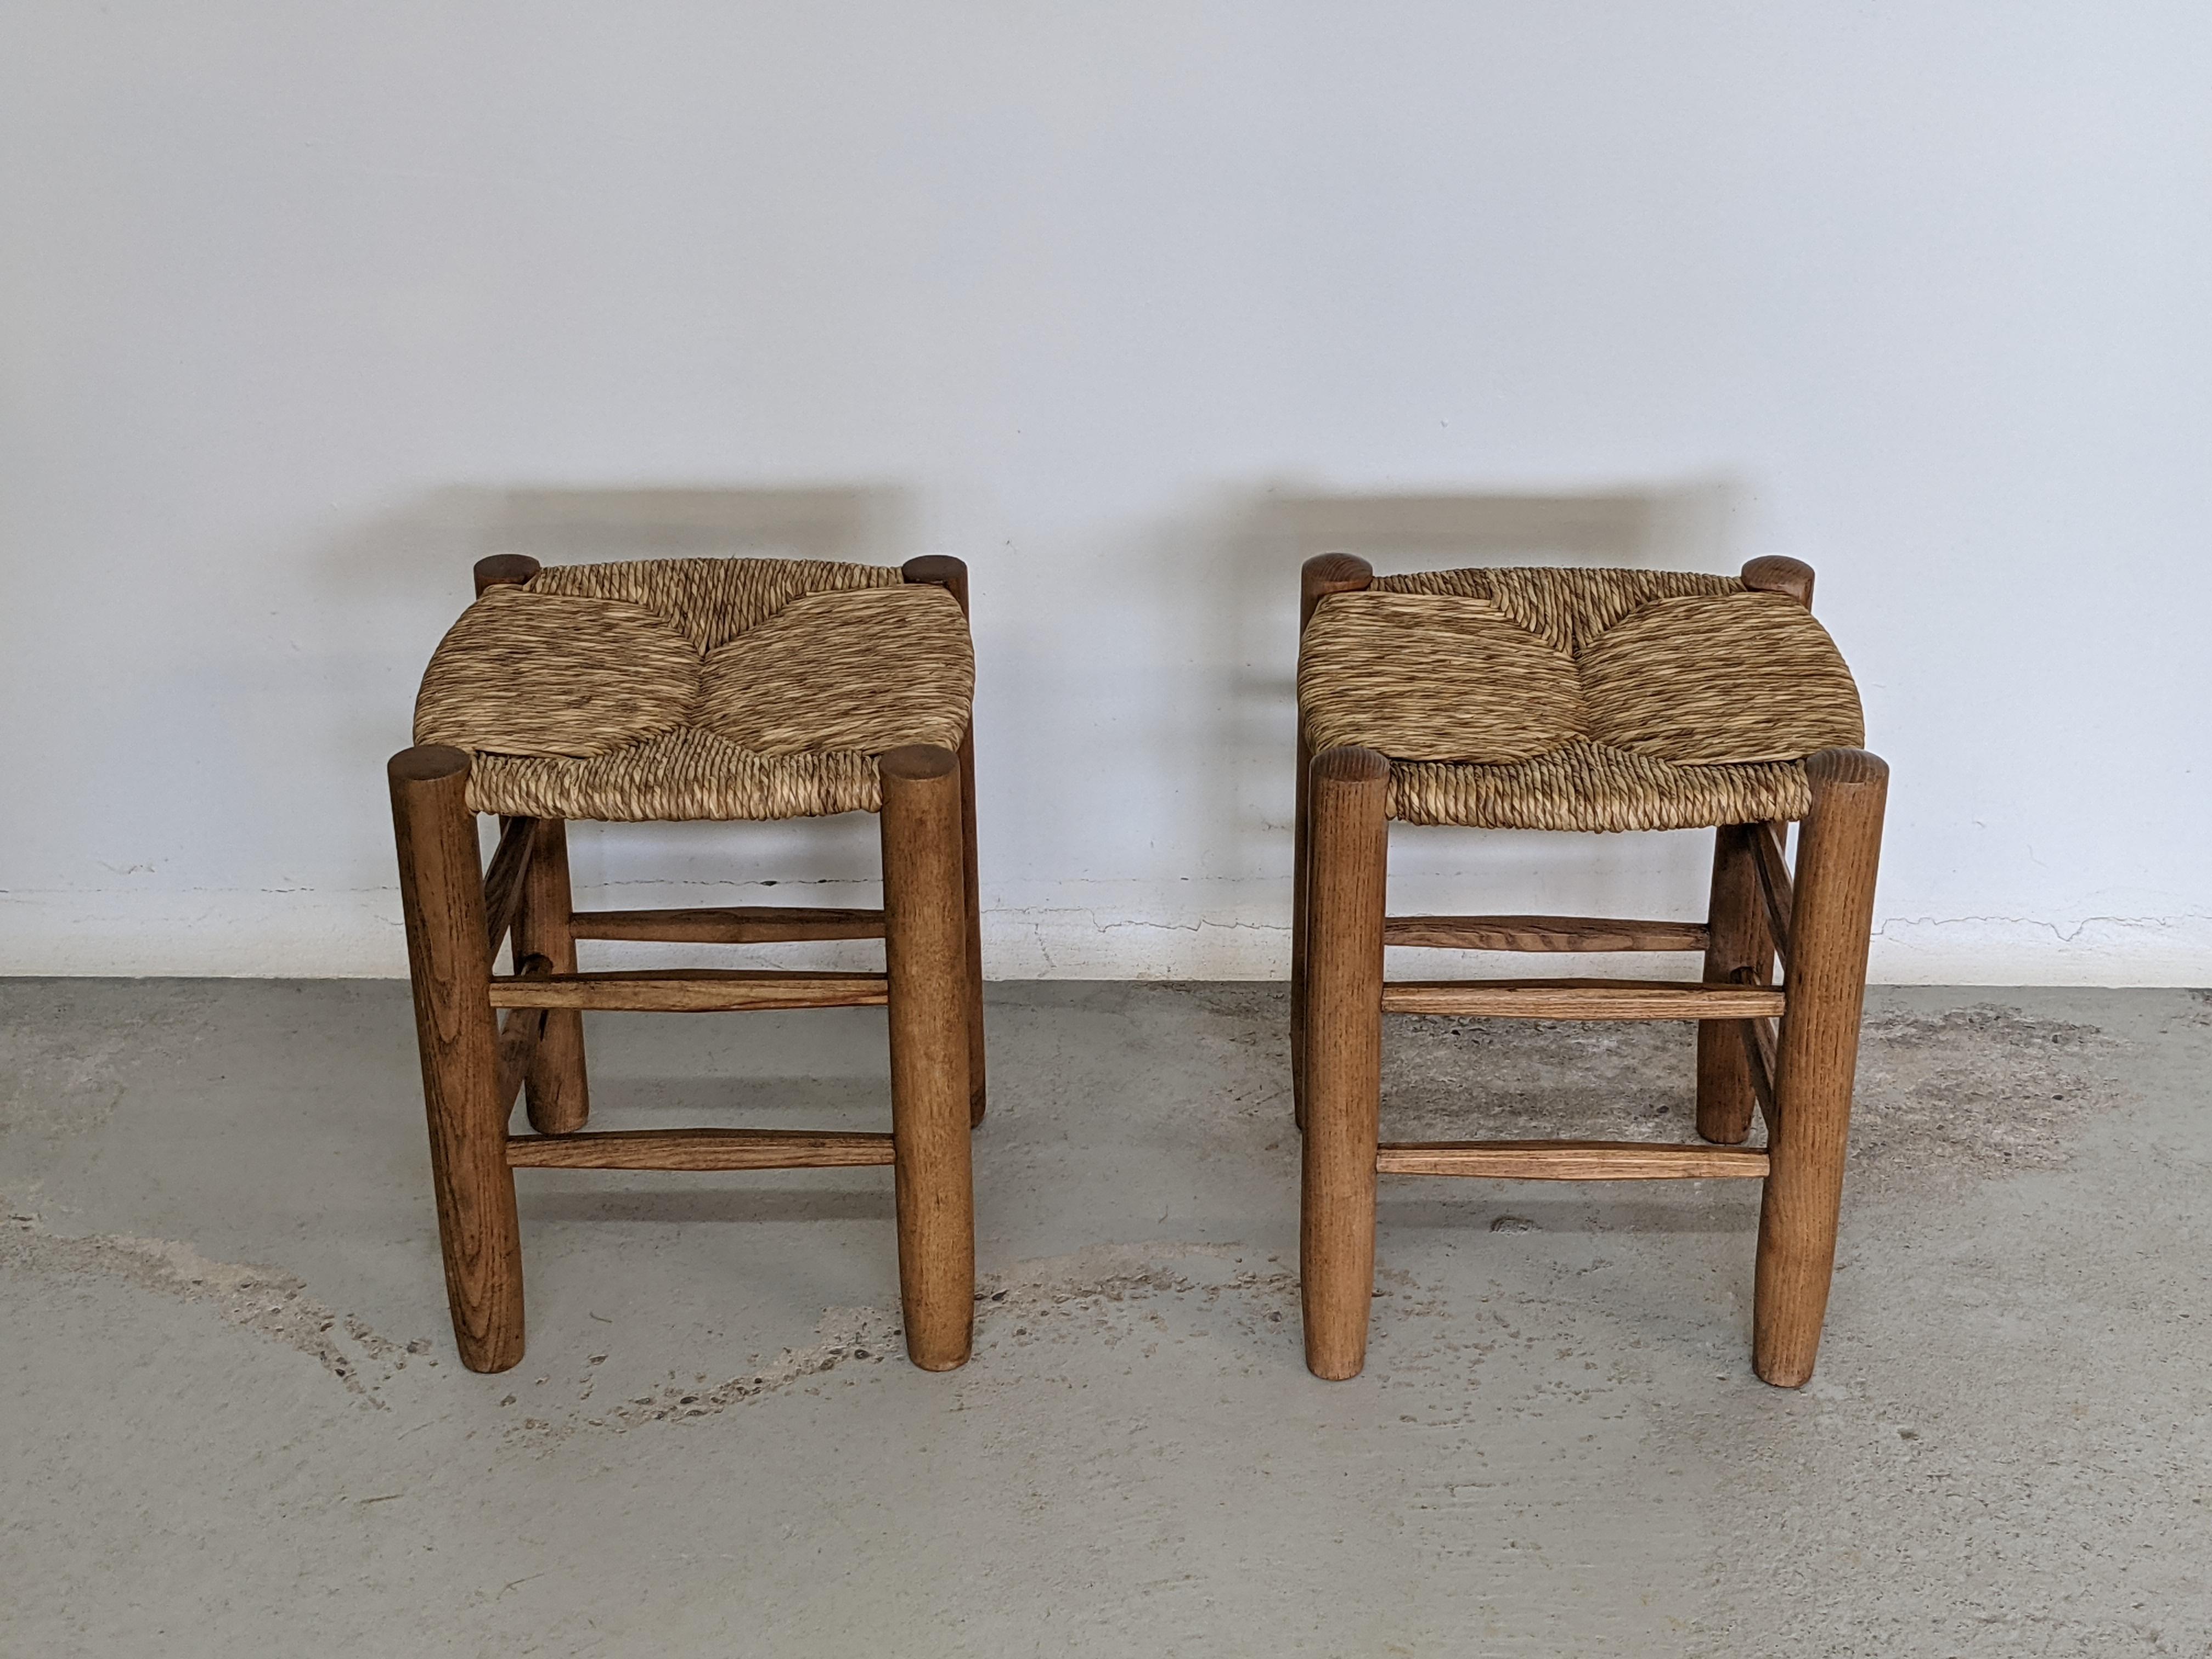 French Charlotte Perriand Solid Wood Stools N 17, Georges Blanchon, France, 1950